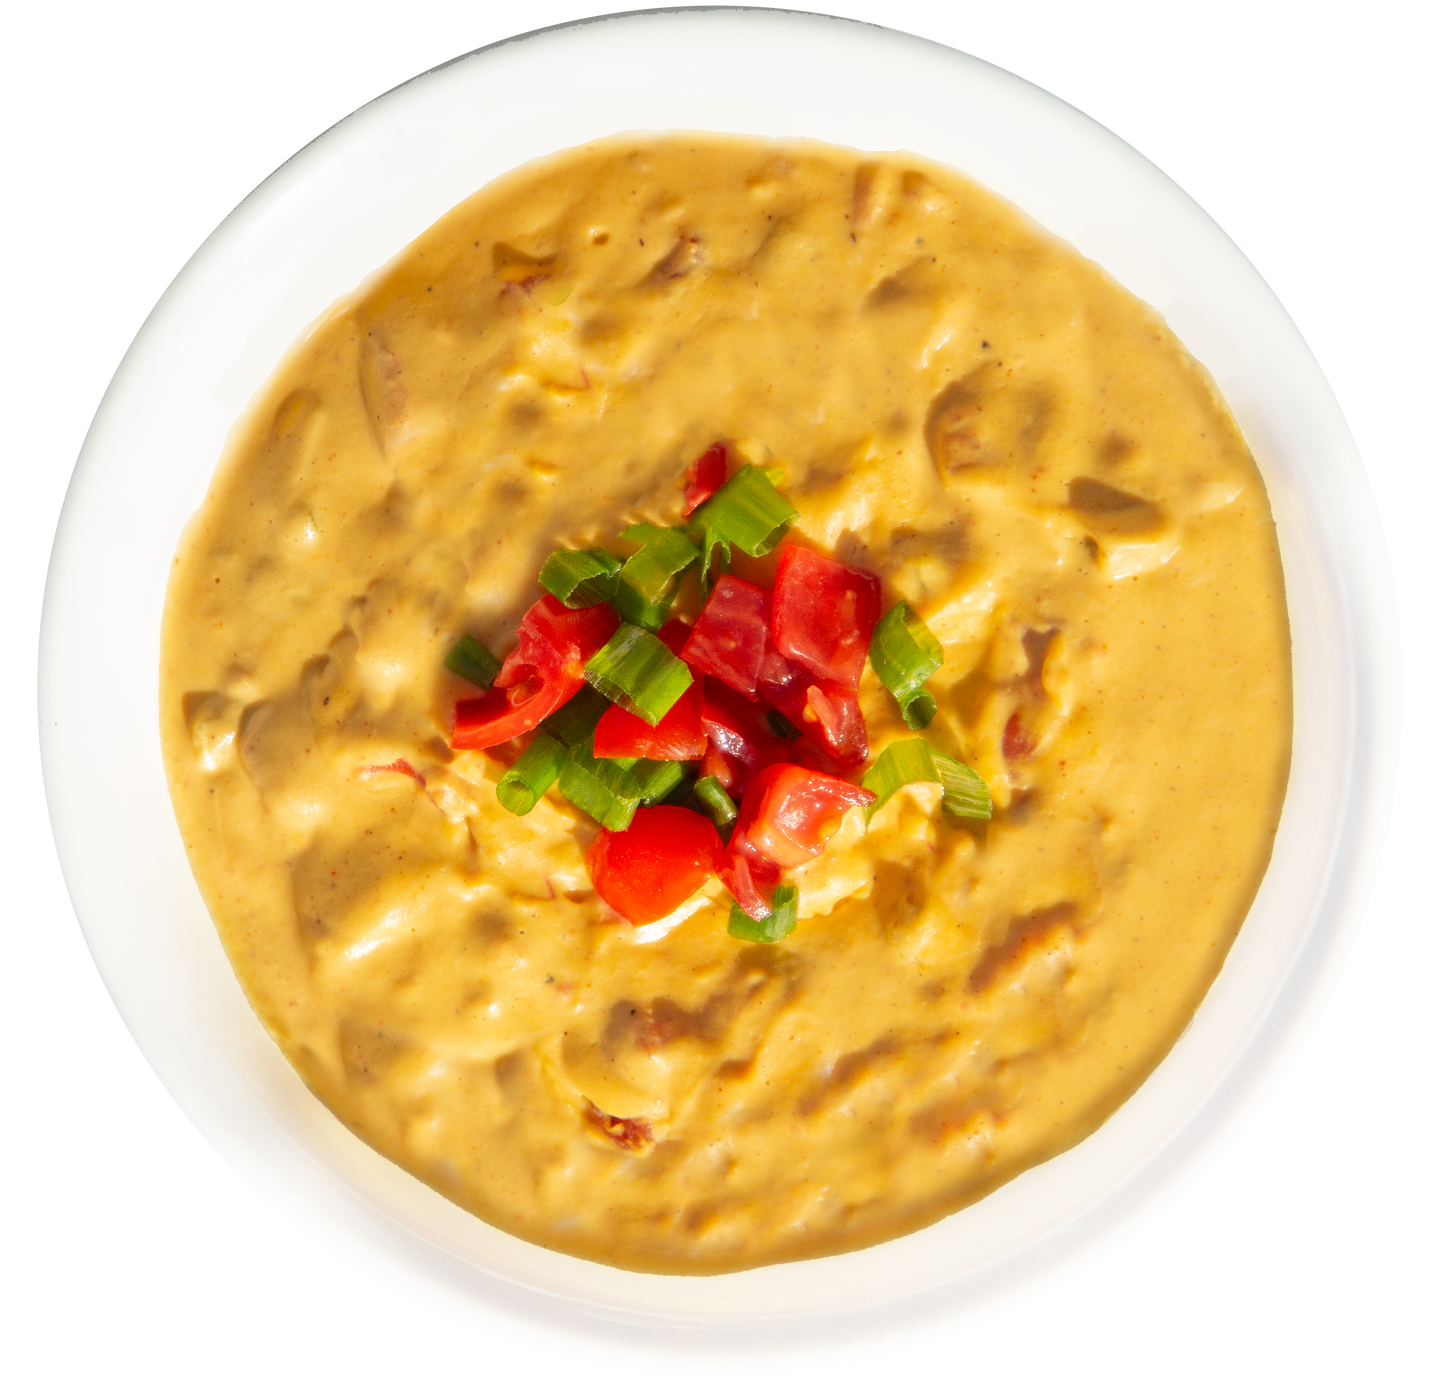 Plant-Based Vegan Vegetarian Dairy-Free Cashew Queso in Des Moines, Iowa